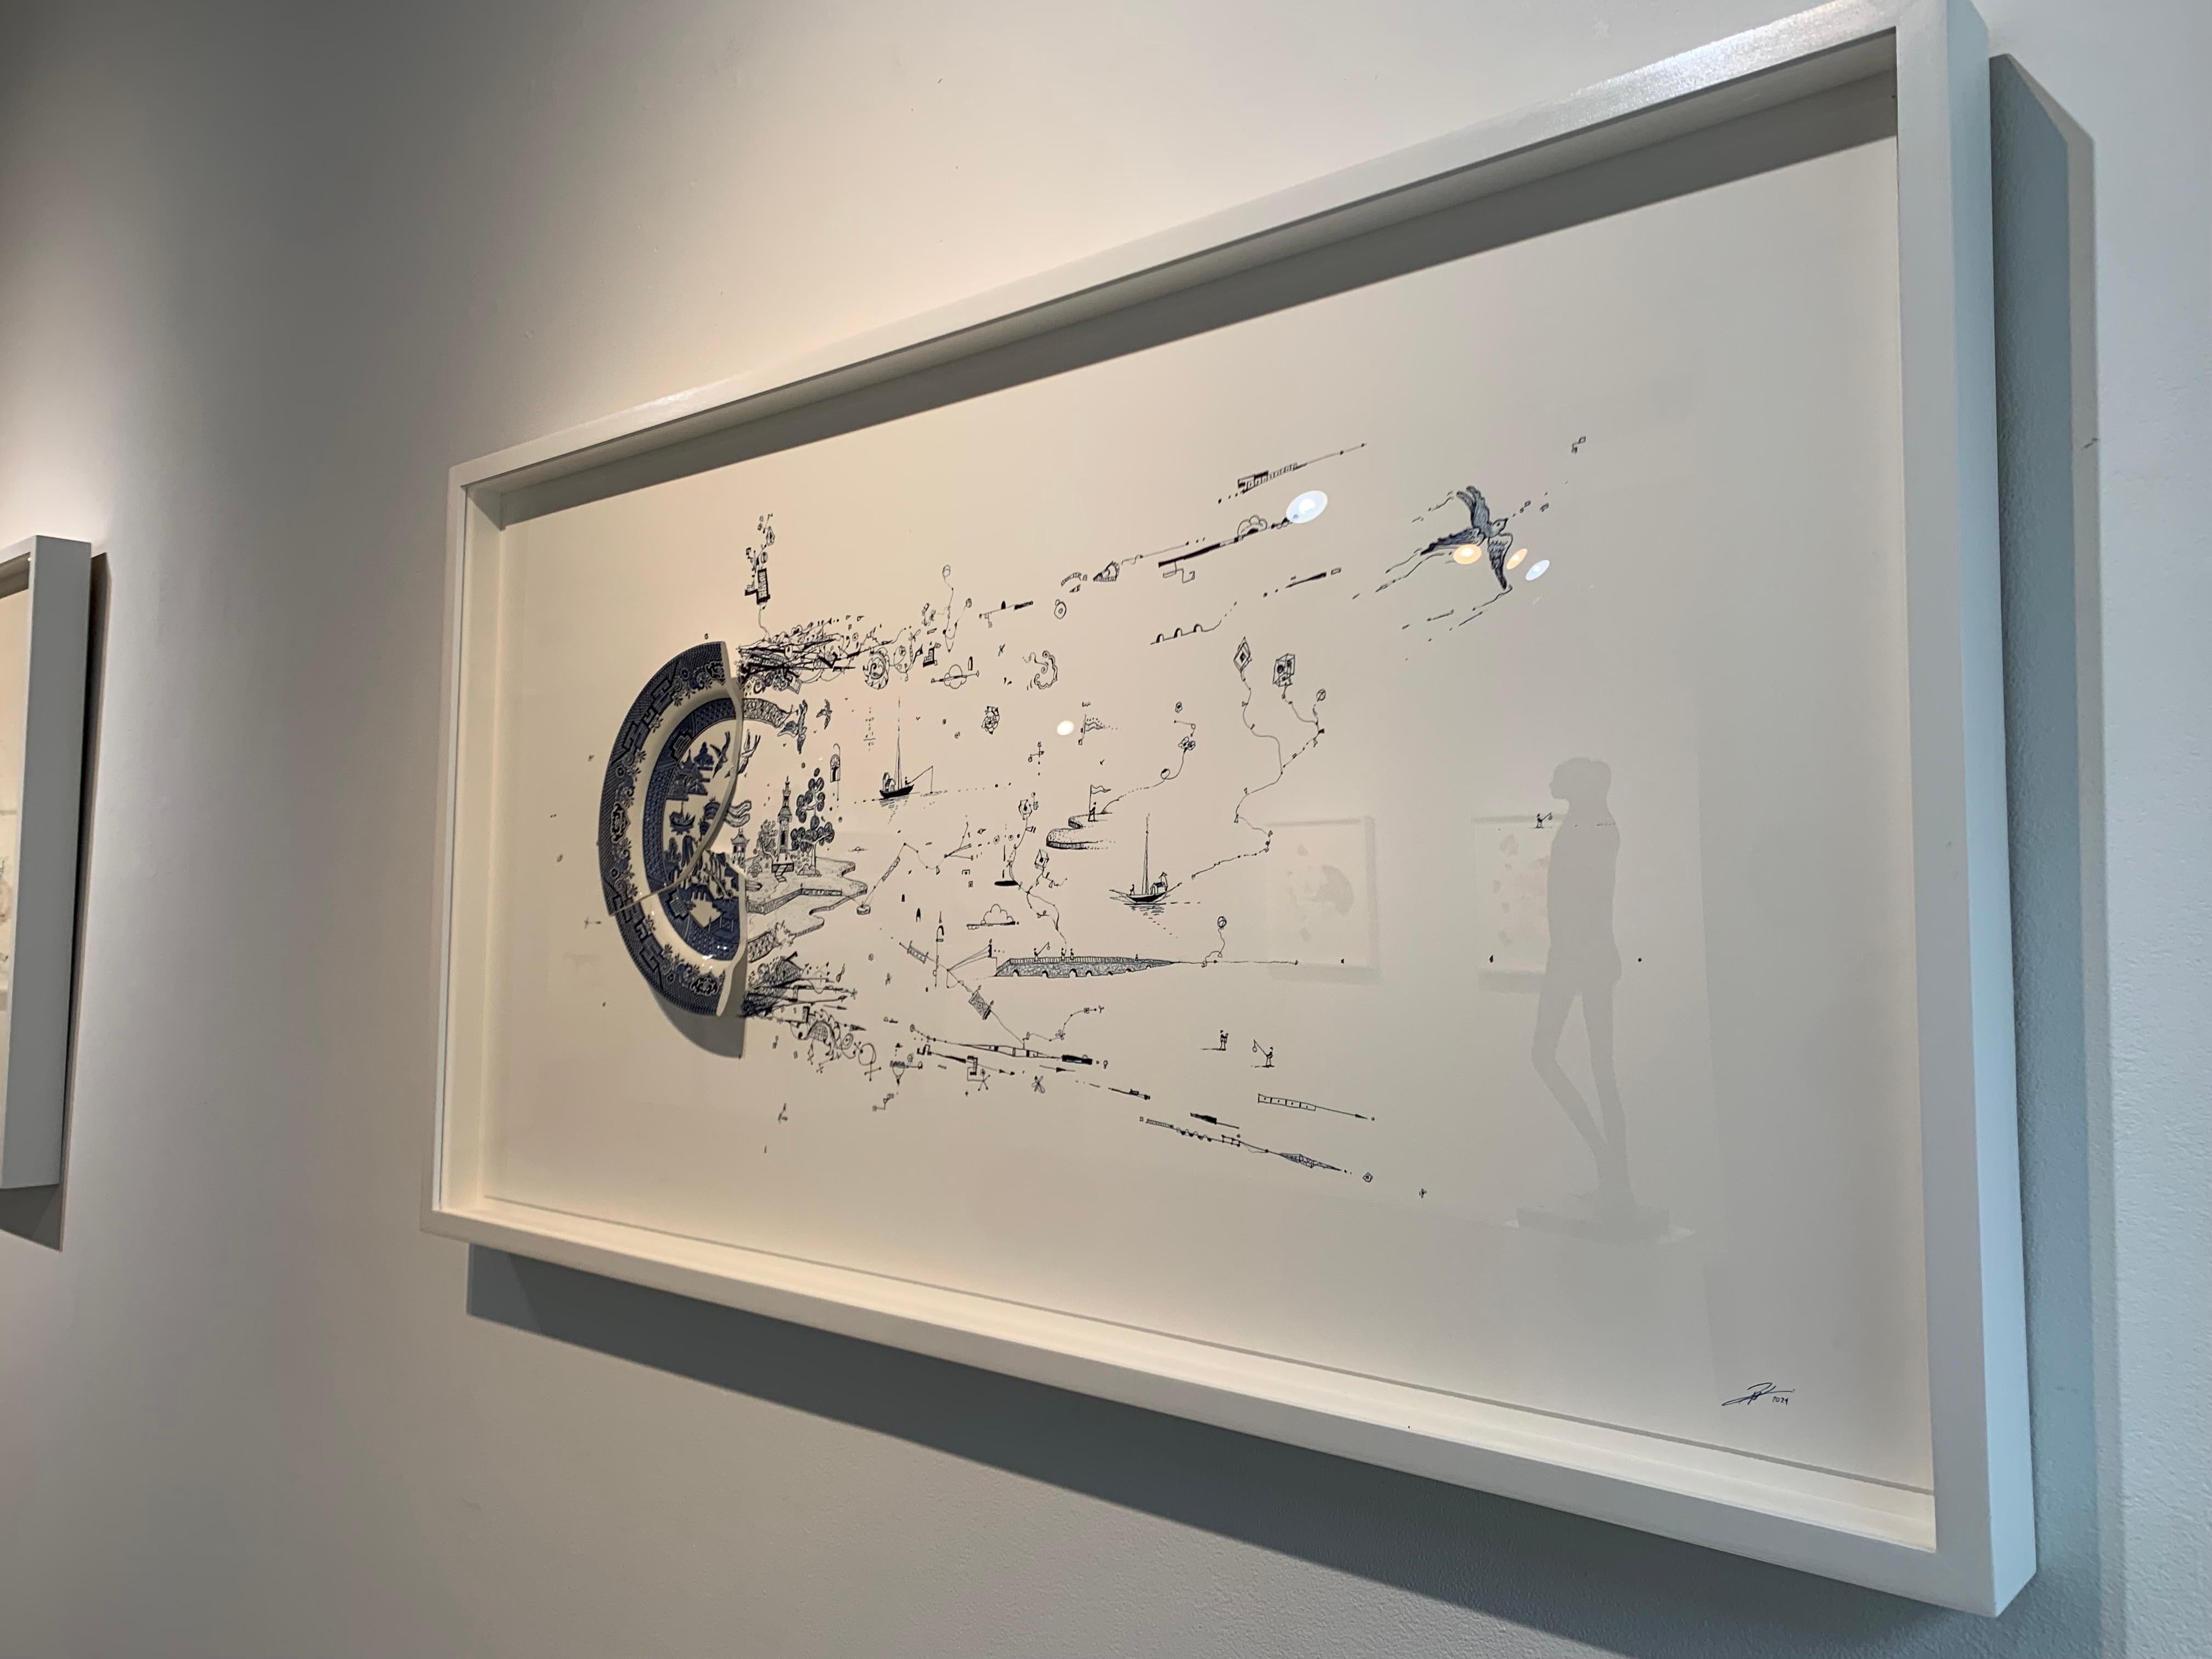 Robert Strati is an American artist who creates multimedia artworks using broken plates. His recent series “Fragmented” started when he accidentally dropped and broke a porcelain plate. The plate being inherited from his wife’s mother, Strati and